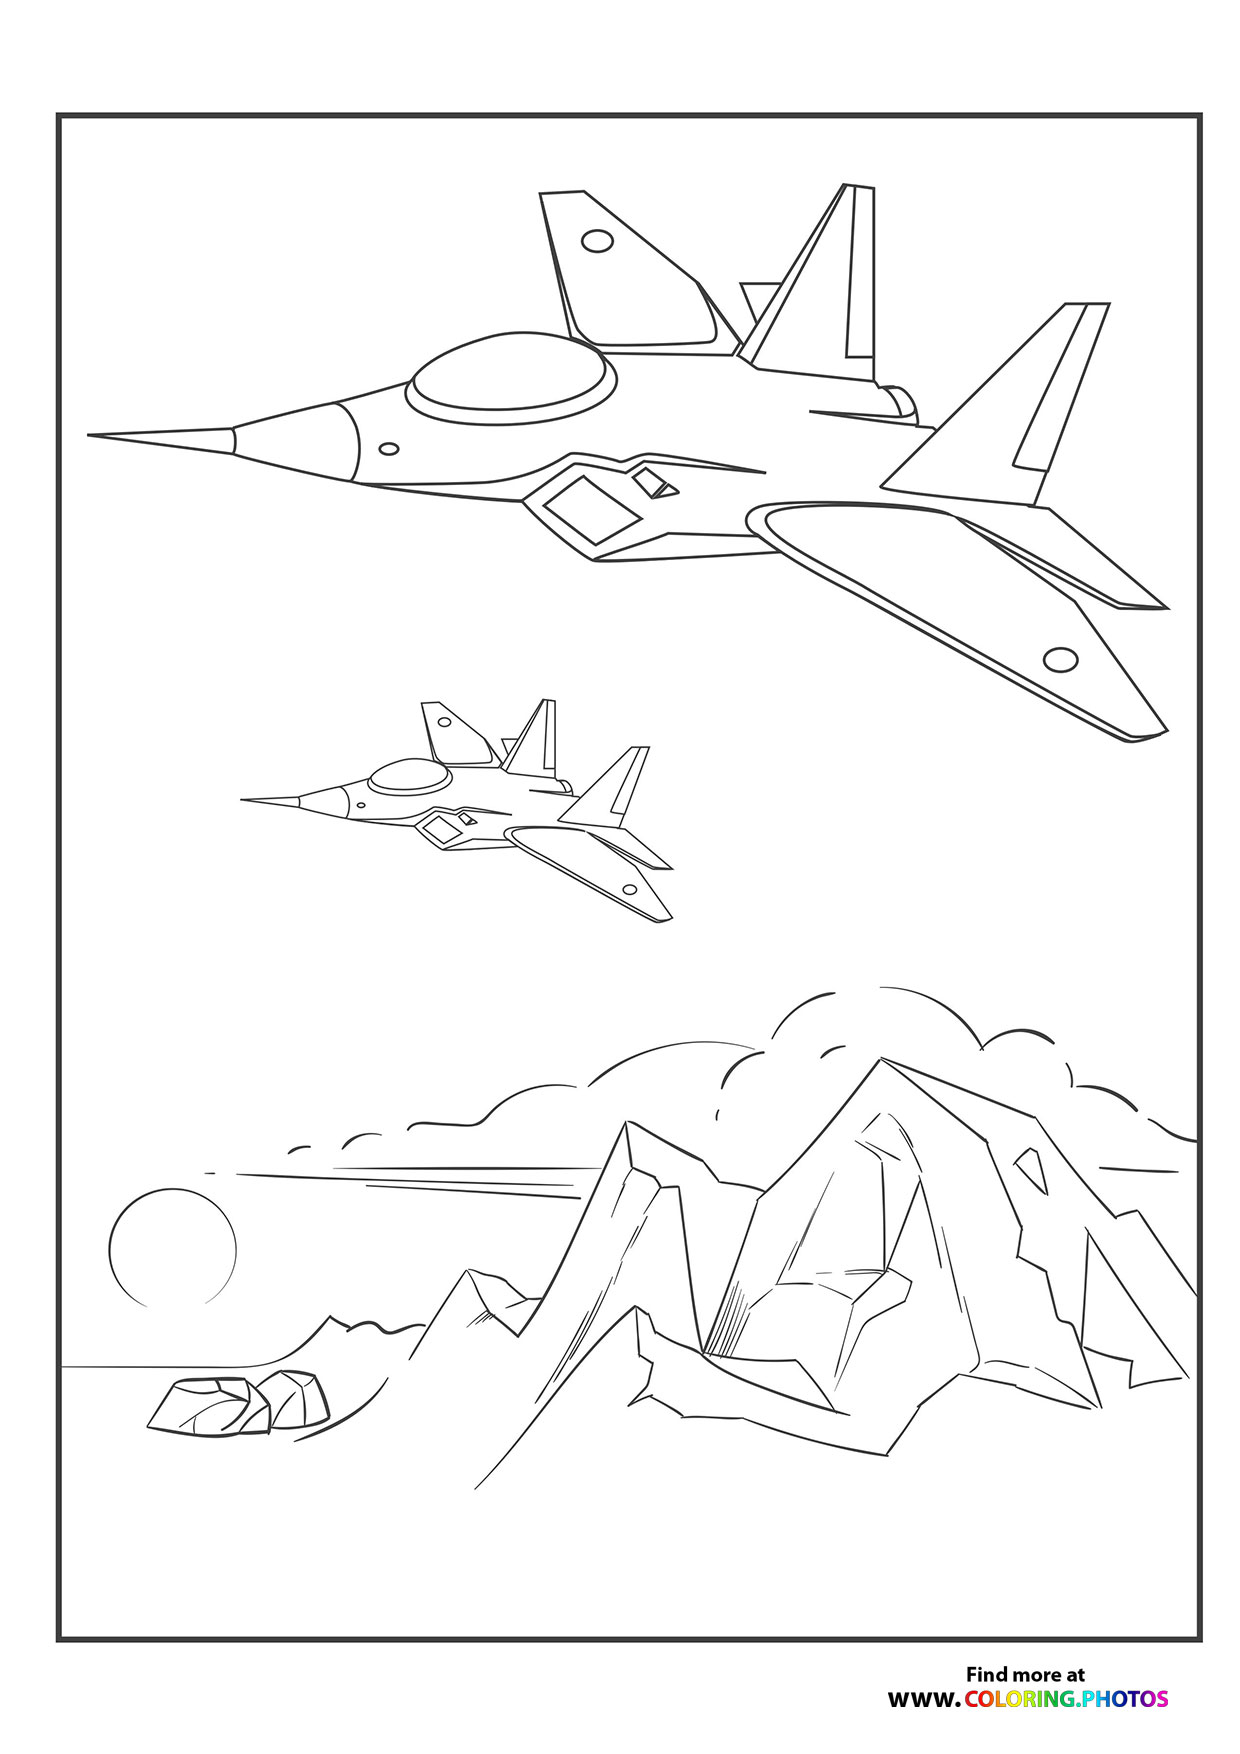 How To Draw A Guy Ejecting From A Jet, Step by Step, Drawing Guide, by  dukenukem - DragoArt